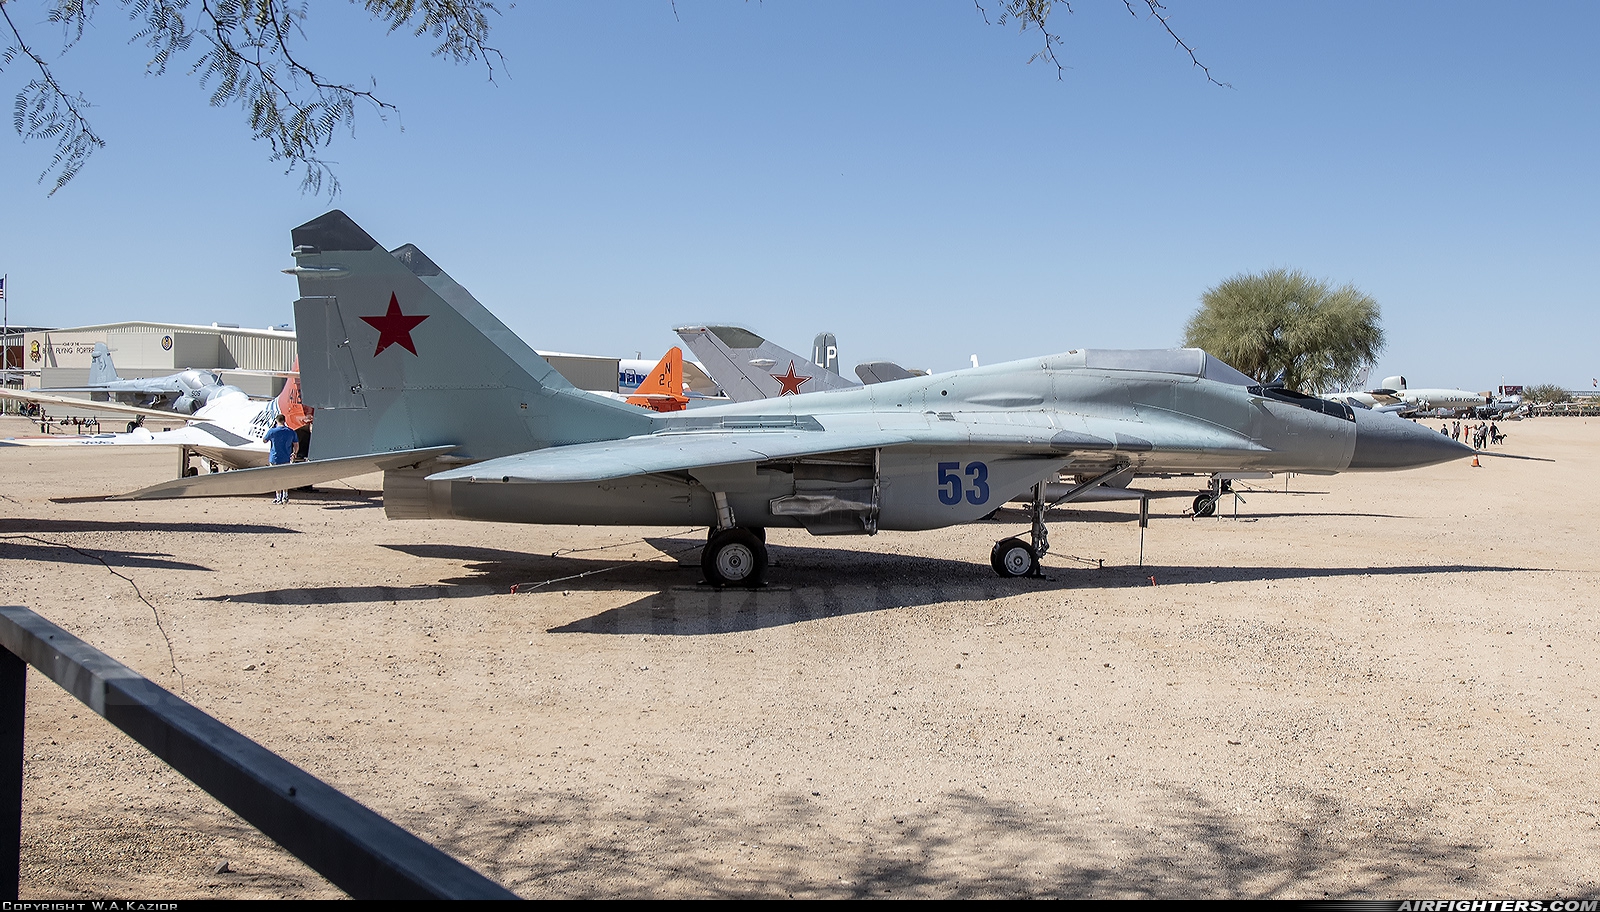 Russia - Air Force Mikoyan-Gurevich MiG-29A (9.12A) 53 at Tucson - Pima Air and Space Museum, USA